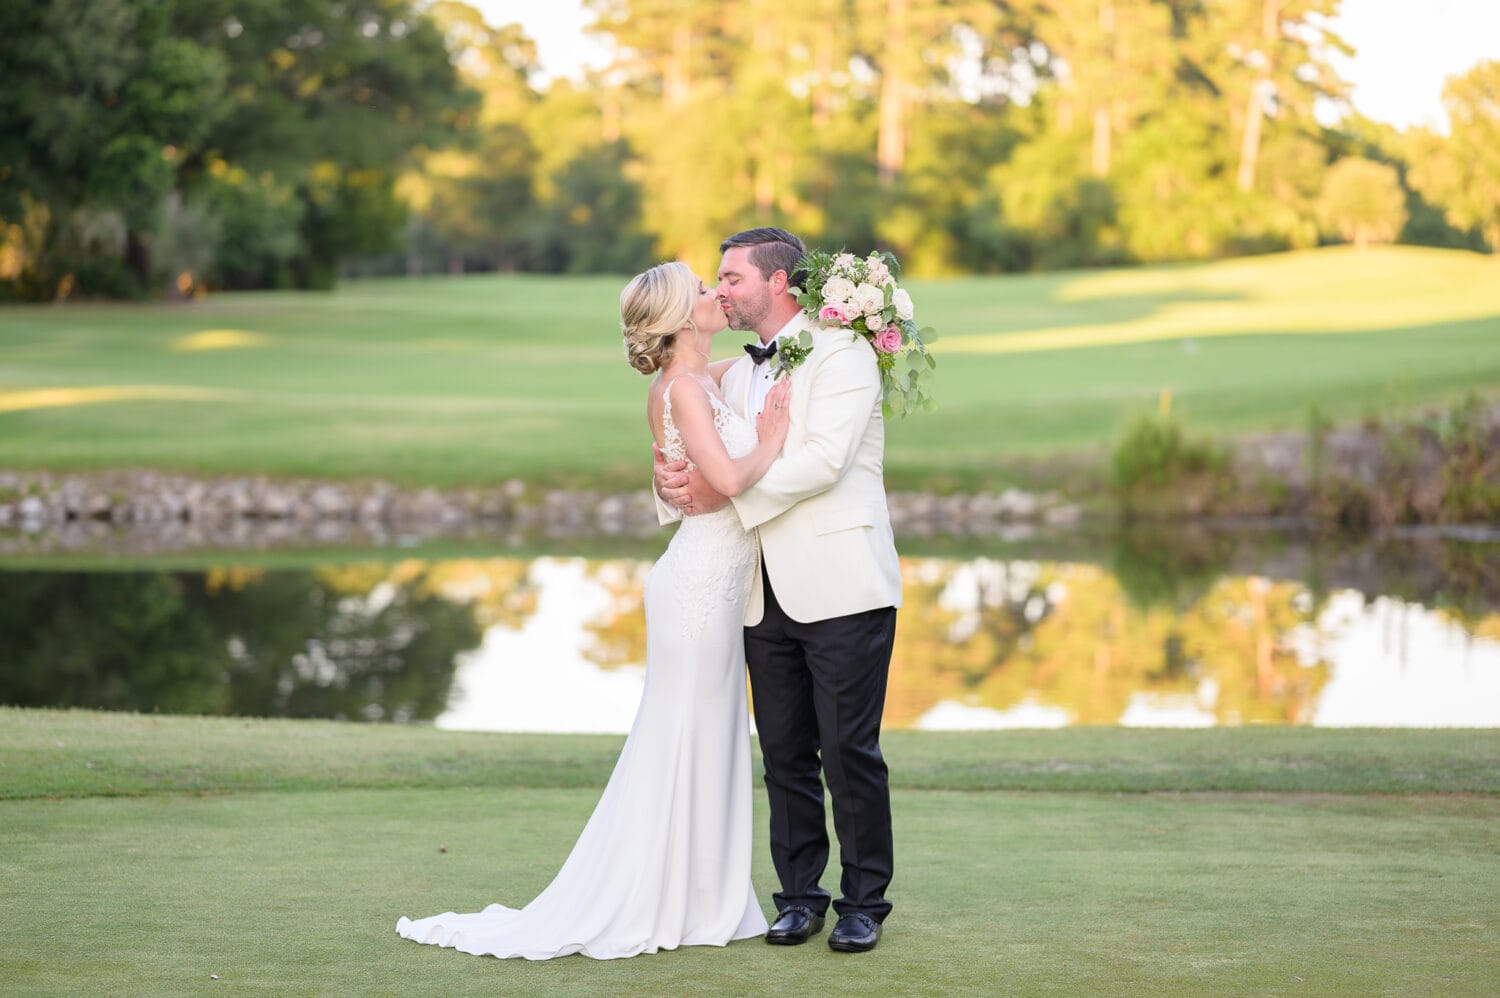 Kiss on the golf course - Caledonia Golf & Fish Club